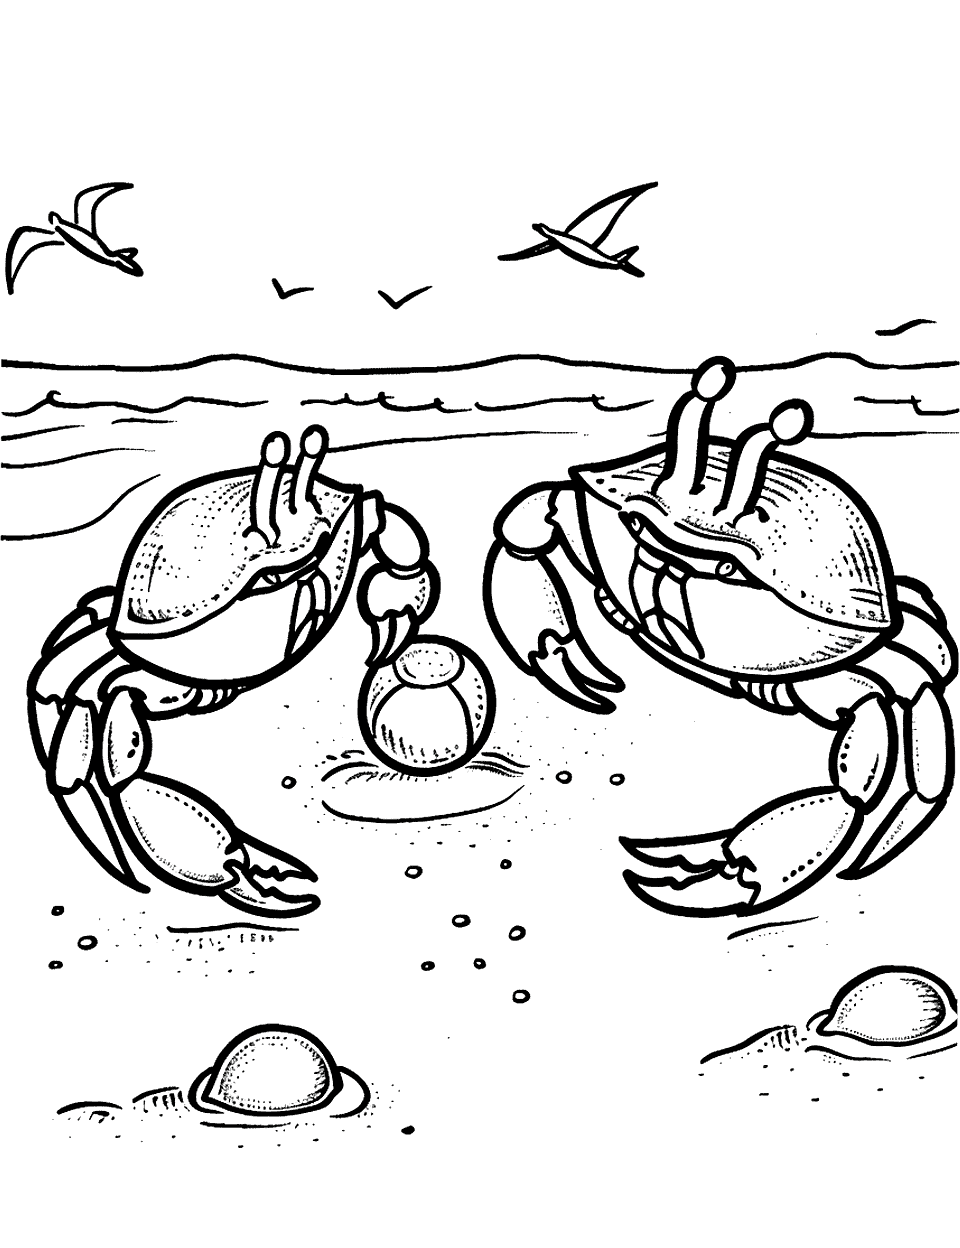 Playful Crabs at the Beach Crab Coloring Page - Two crabs playing with a small beach ball near the water’s edge.